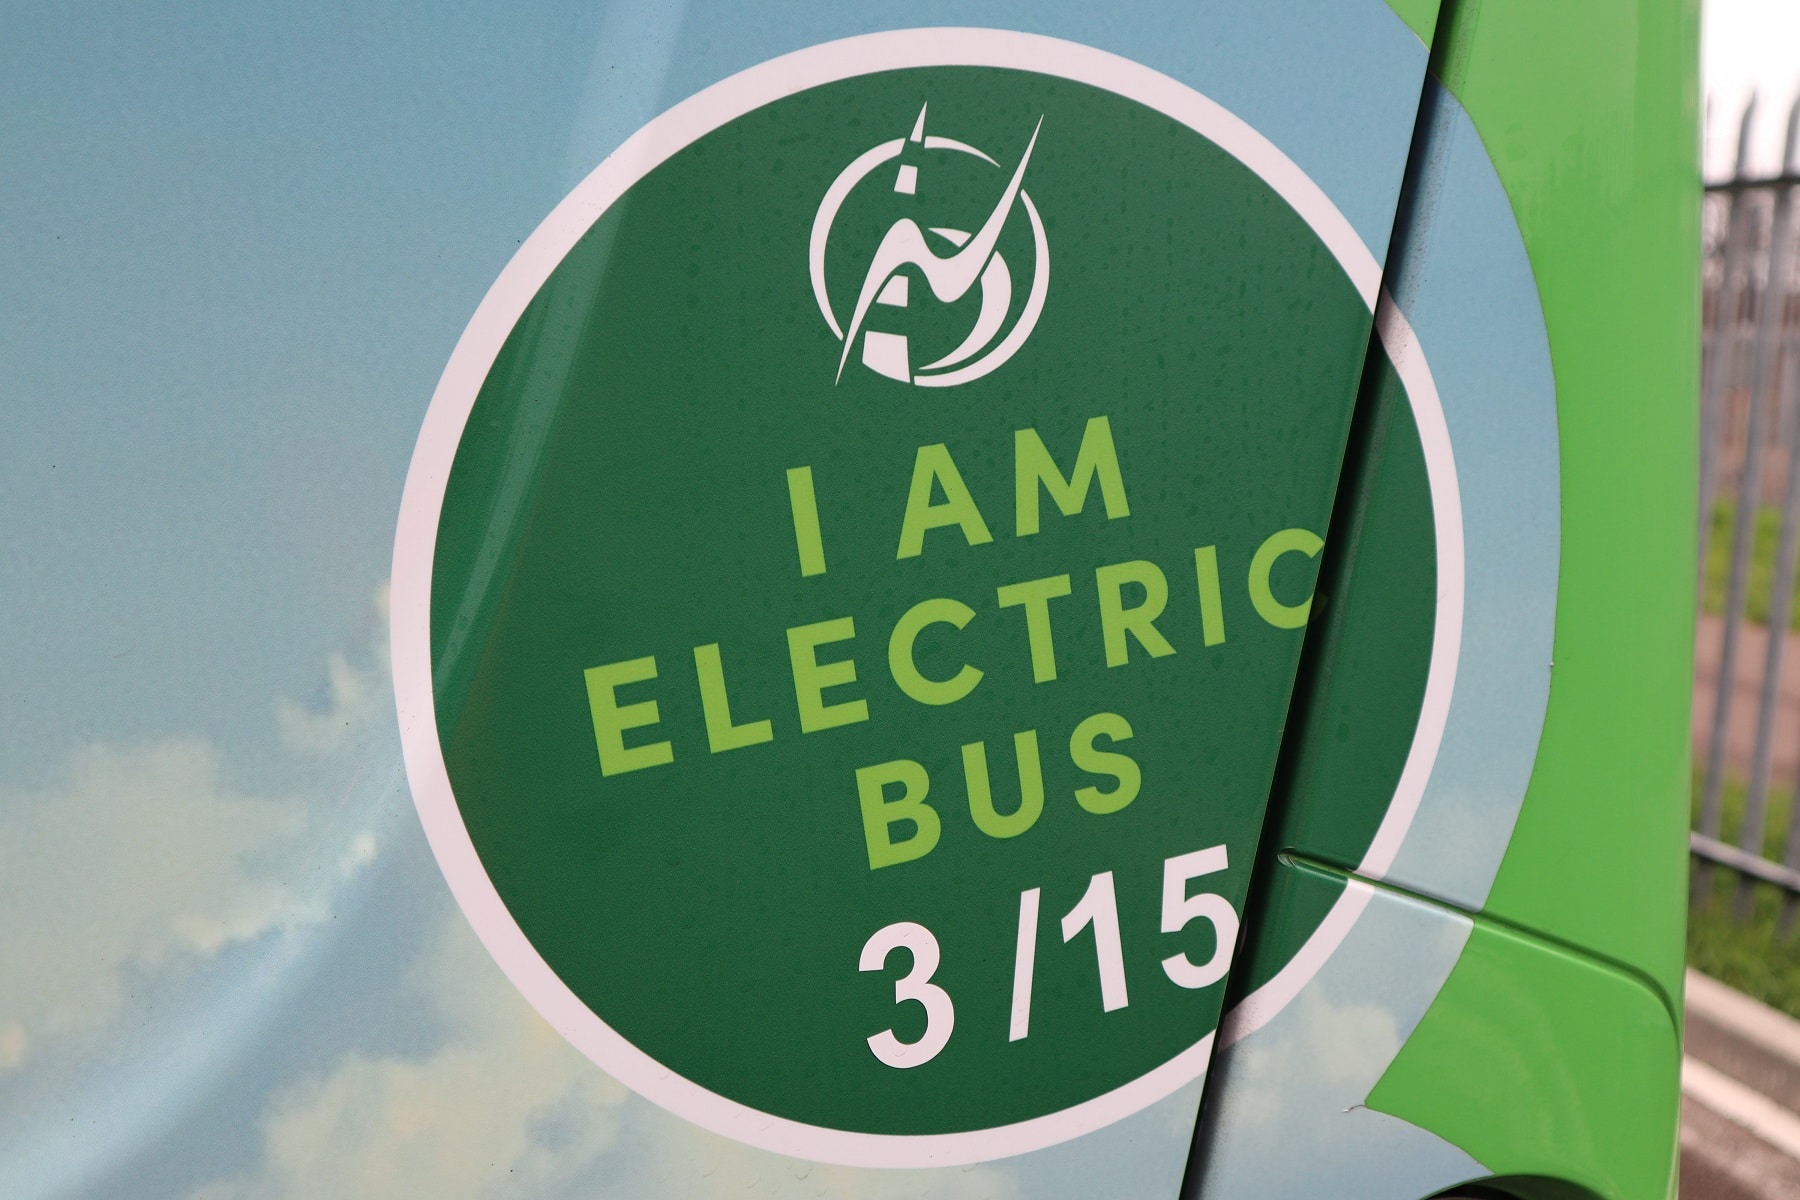 Low carbon buses and coaches